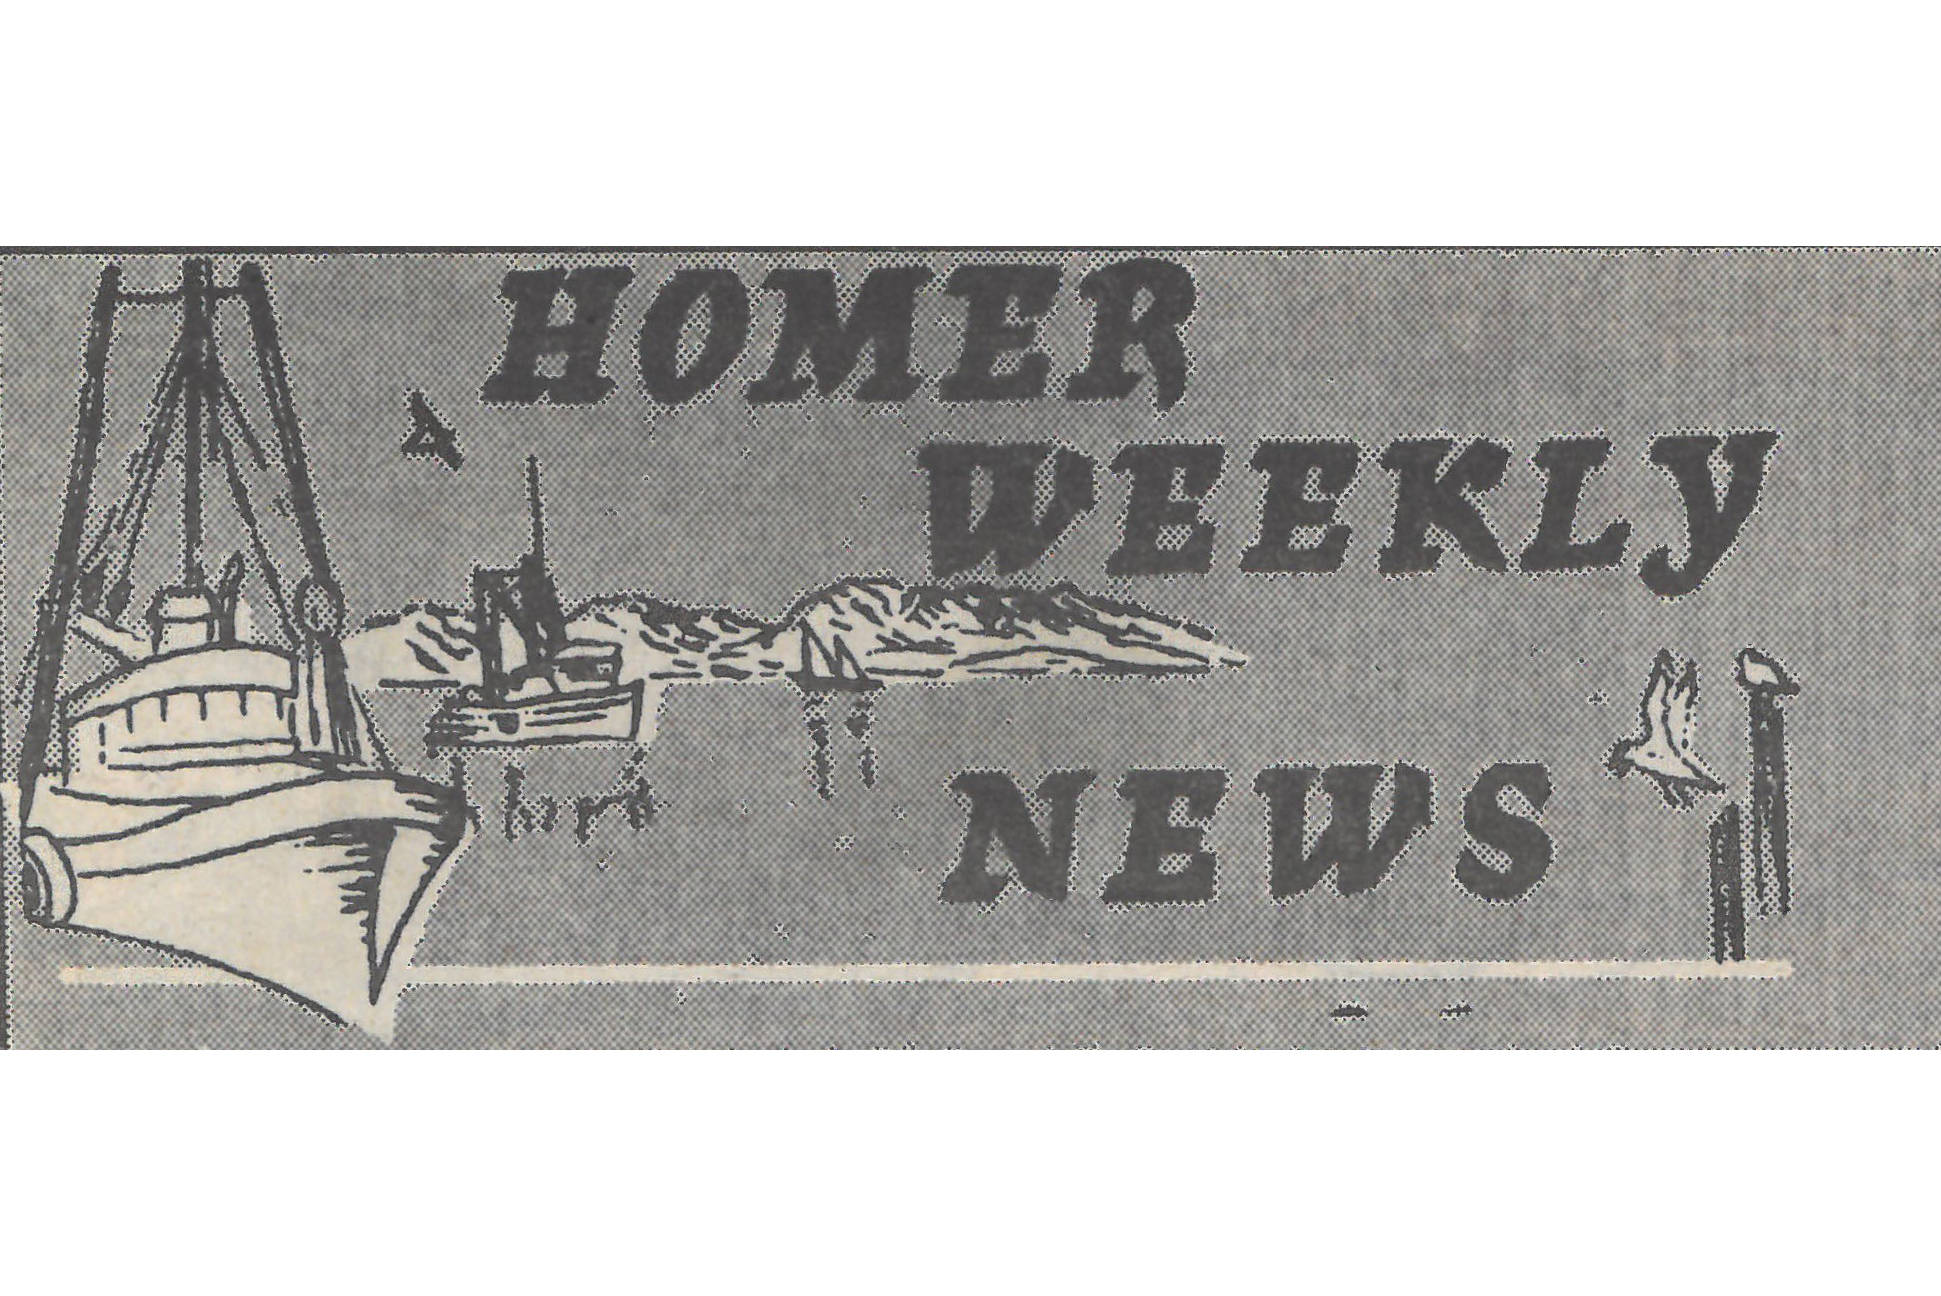 The masthead for the Homer Weekly News as sketched by Alathea Clymer of Fritz Creek Studios.